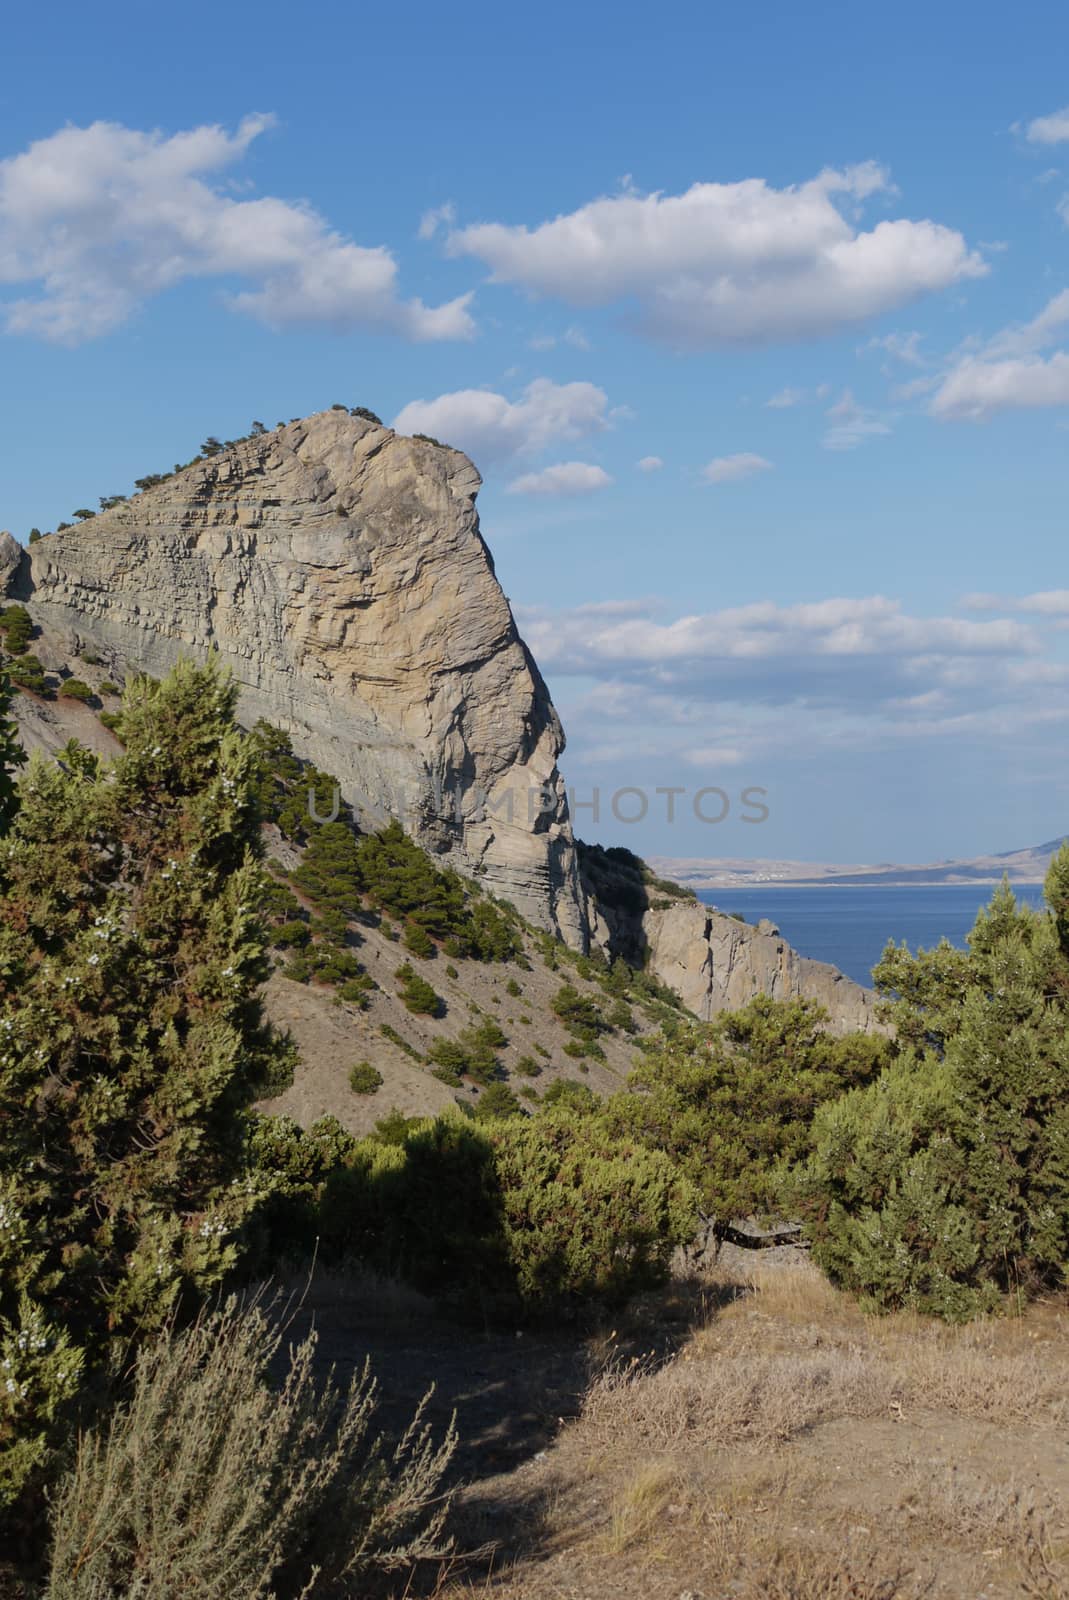 A beautiful view of the sea from behind a cliff on a hill with a by Adamchuk